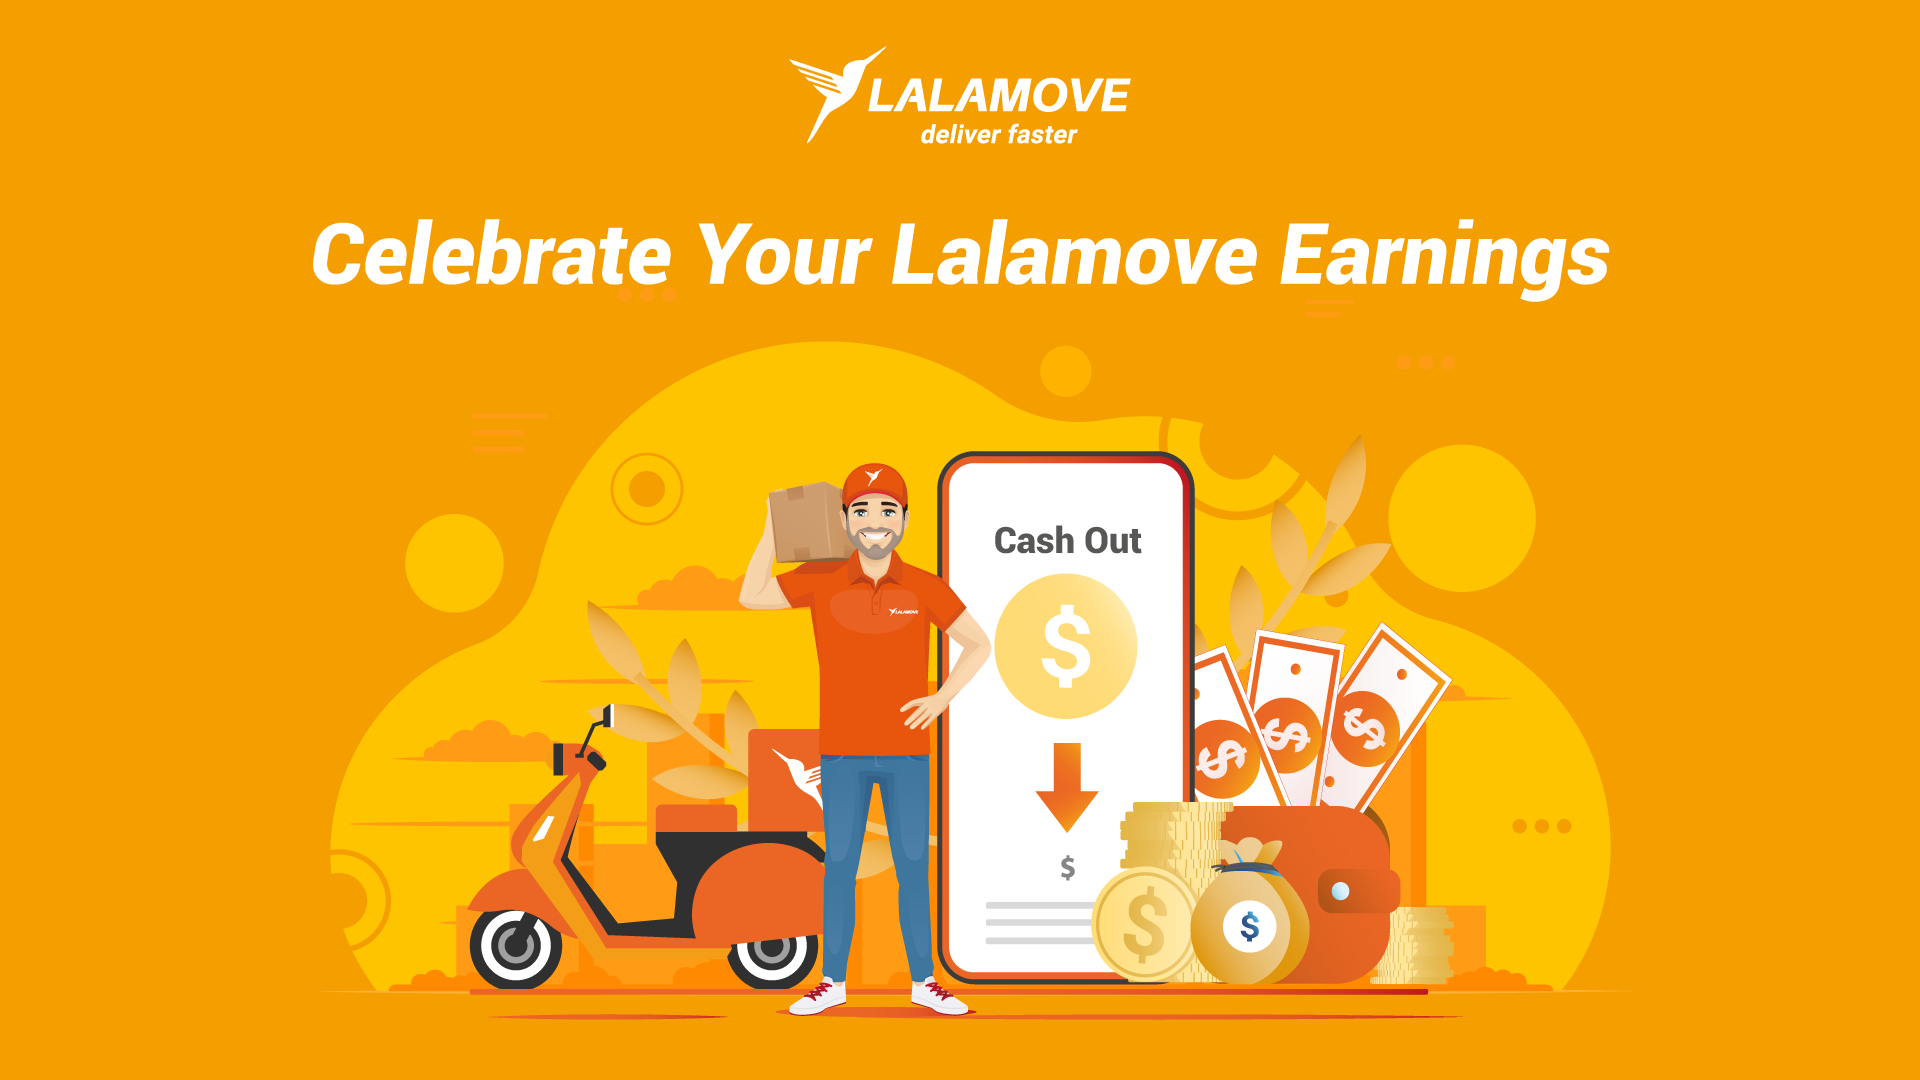 How To Cash Out Your Income As A Lalamove Delivery Partner